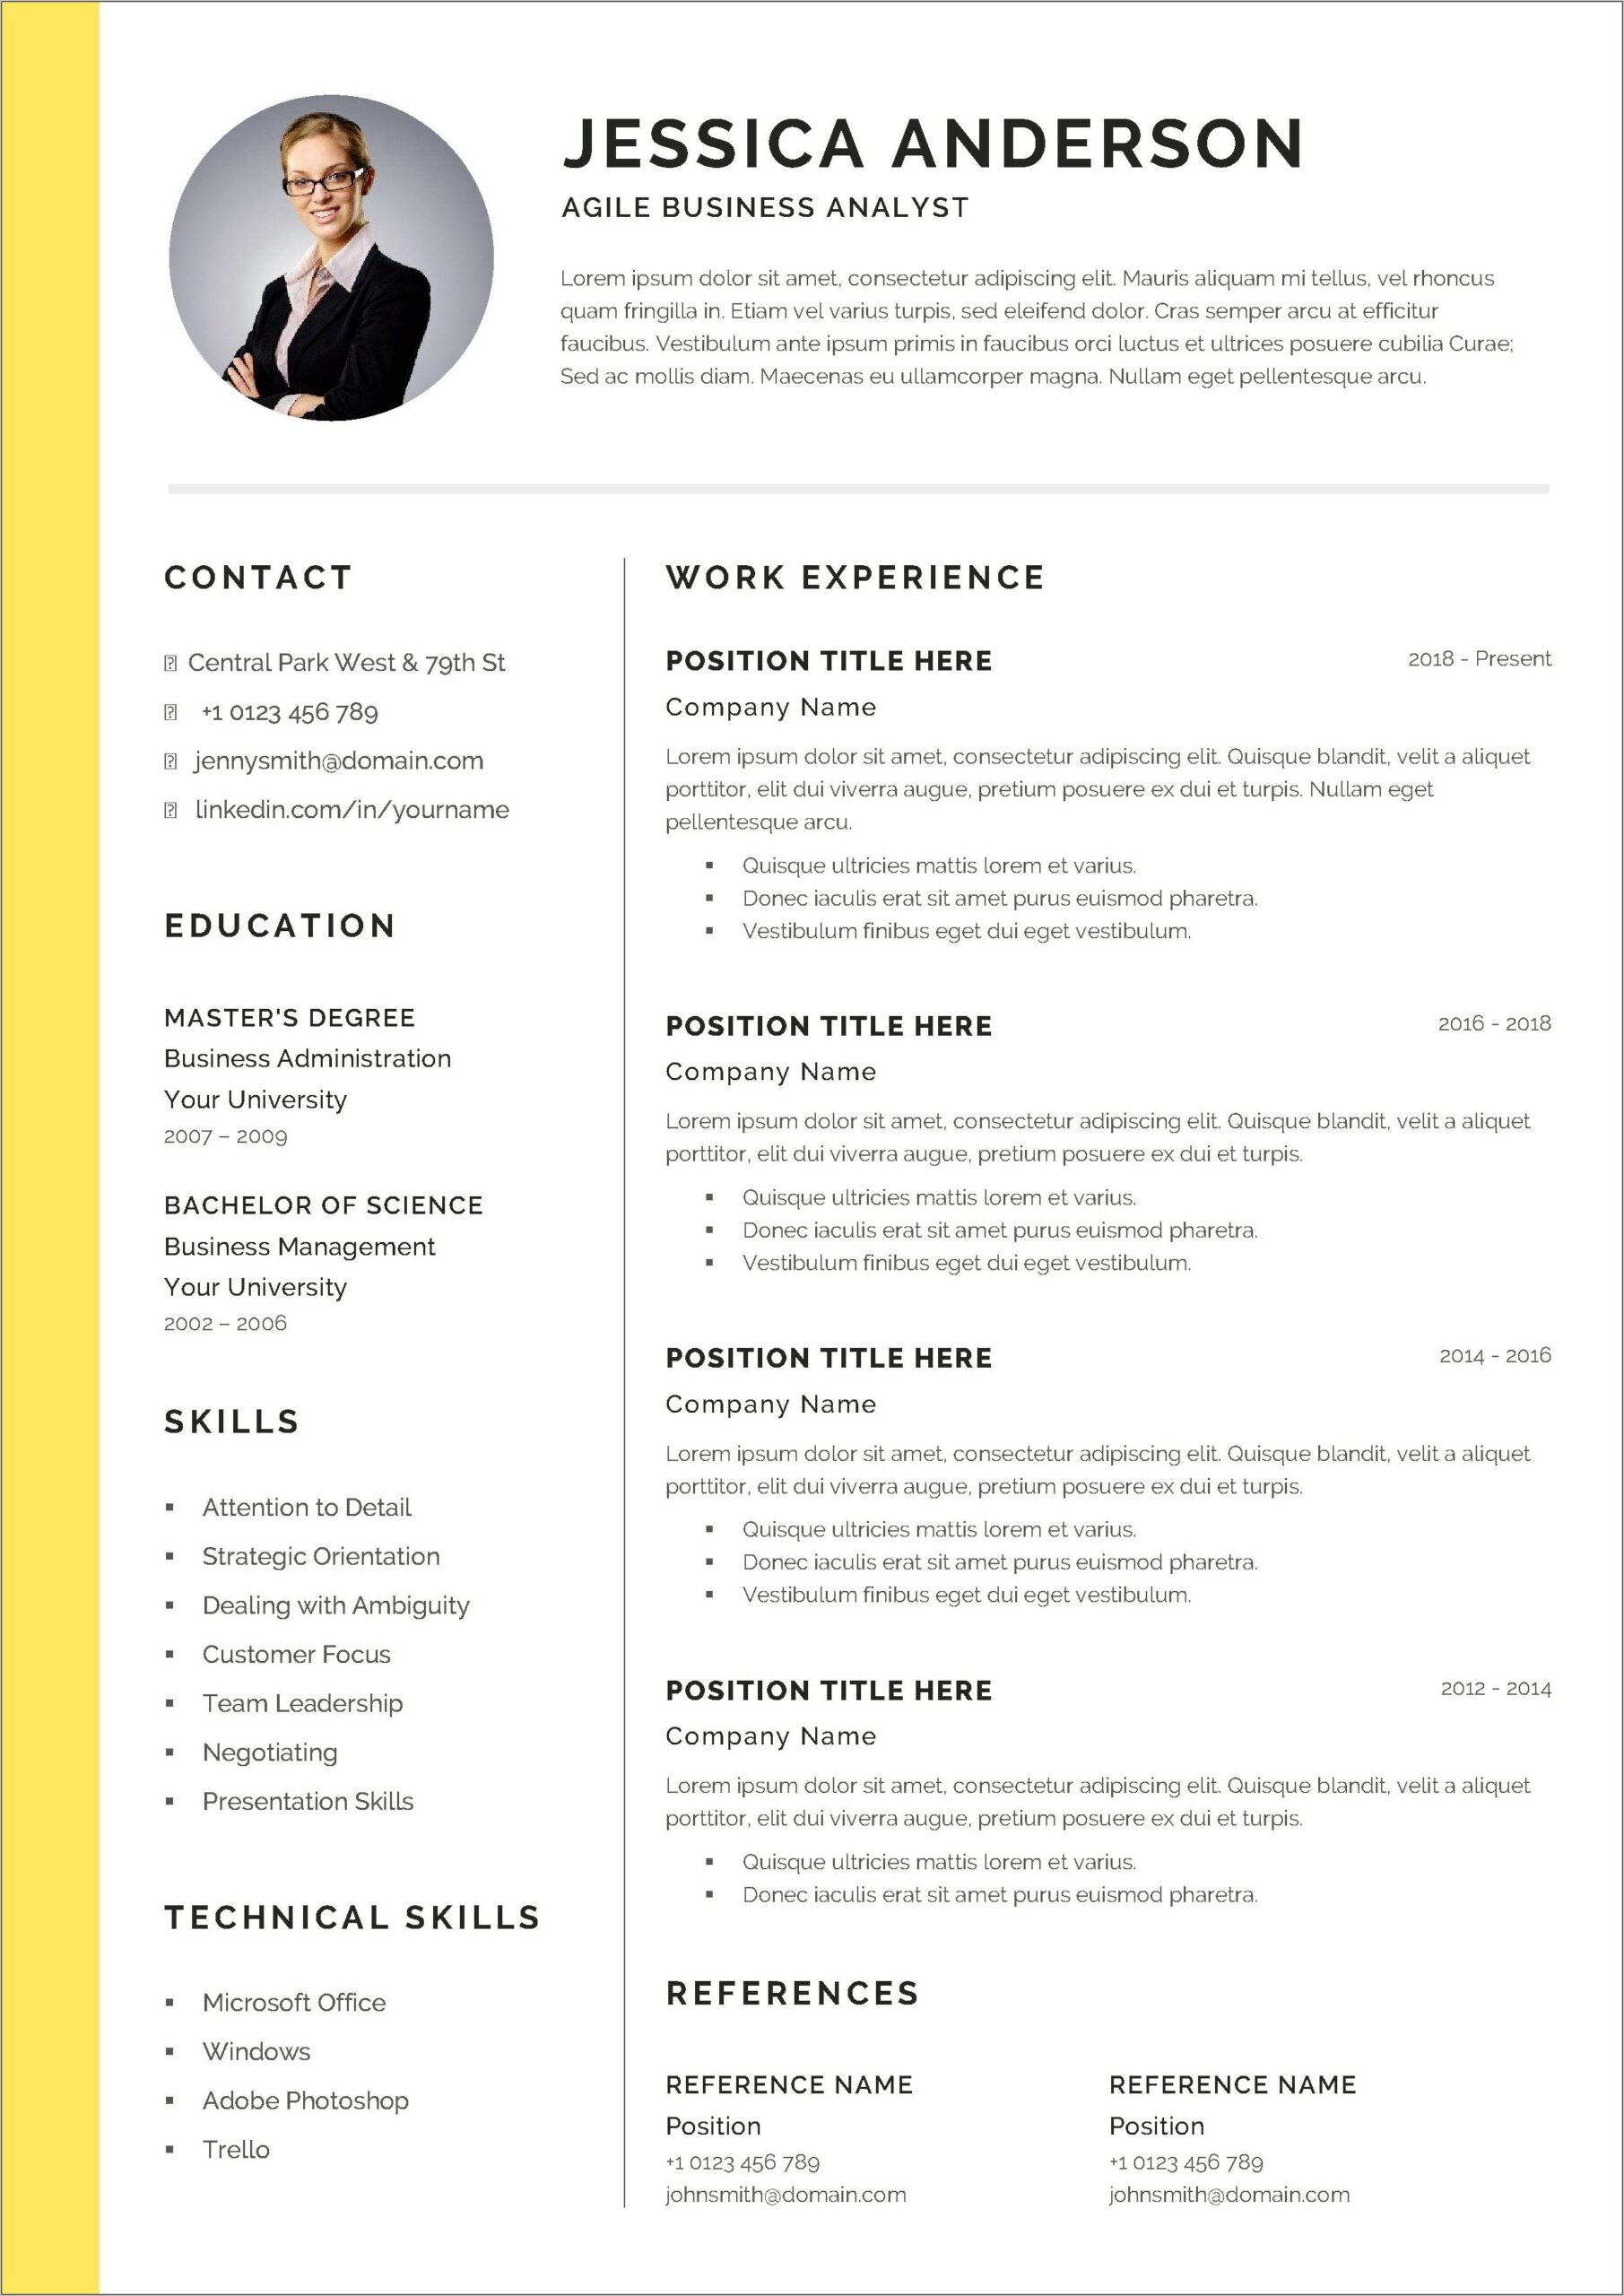 A Good Resume Examples For Business Analyst